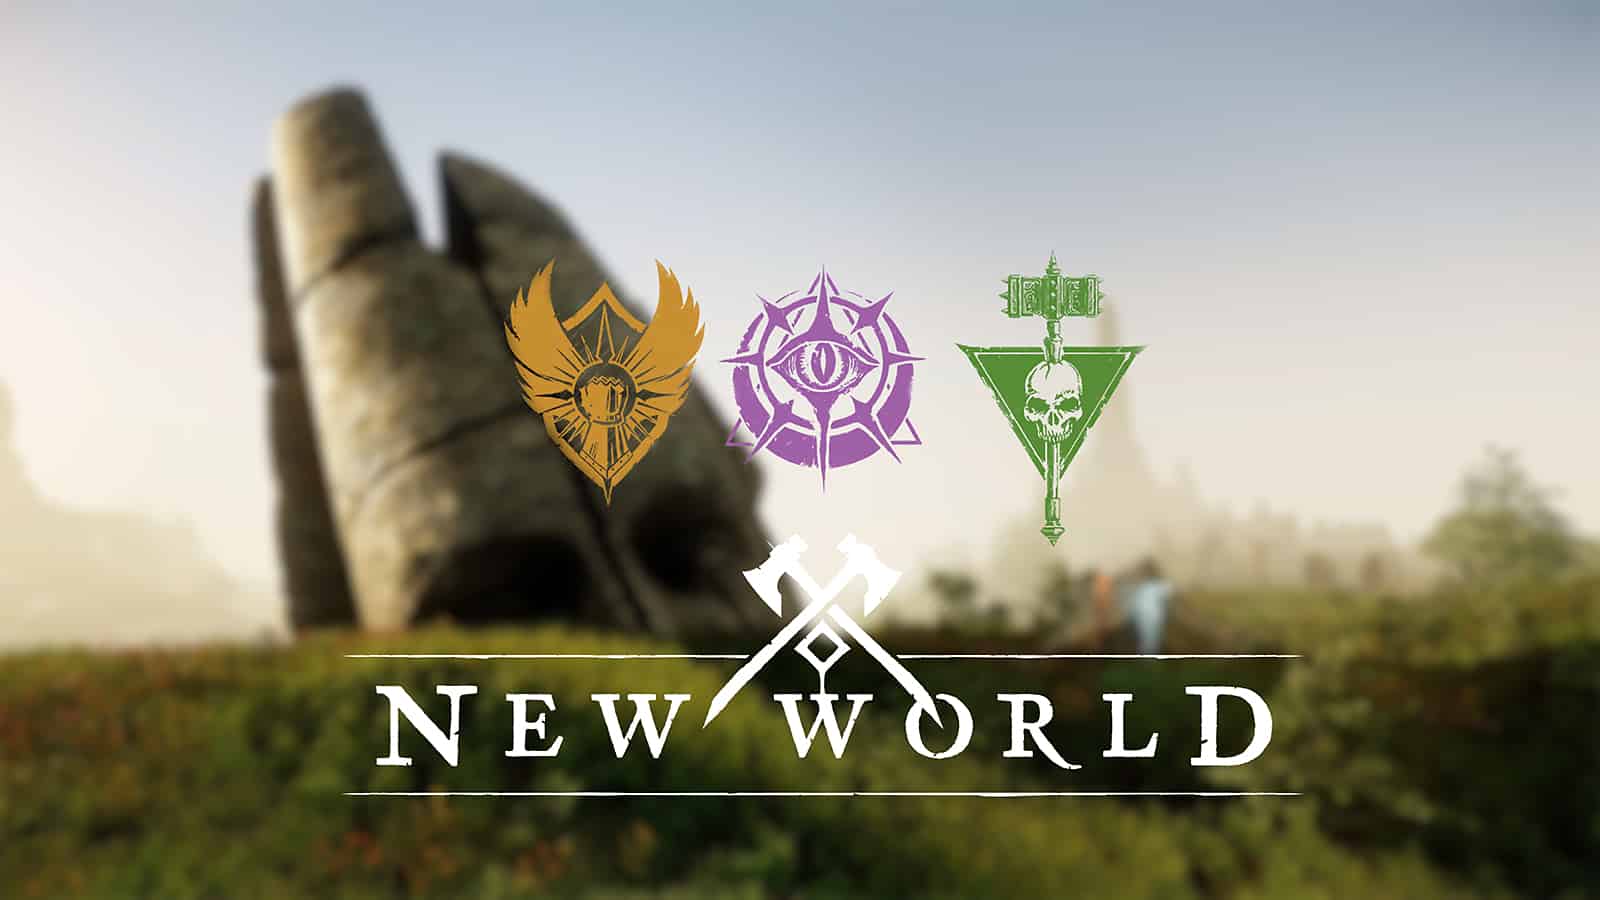 New World Best Leveling Builds 2023 - Top 3 Builds & Weapon Combos to Level  Up Fast in New World 2023